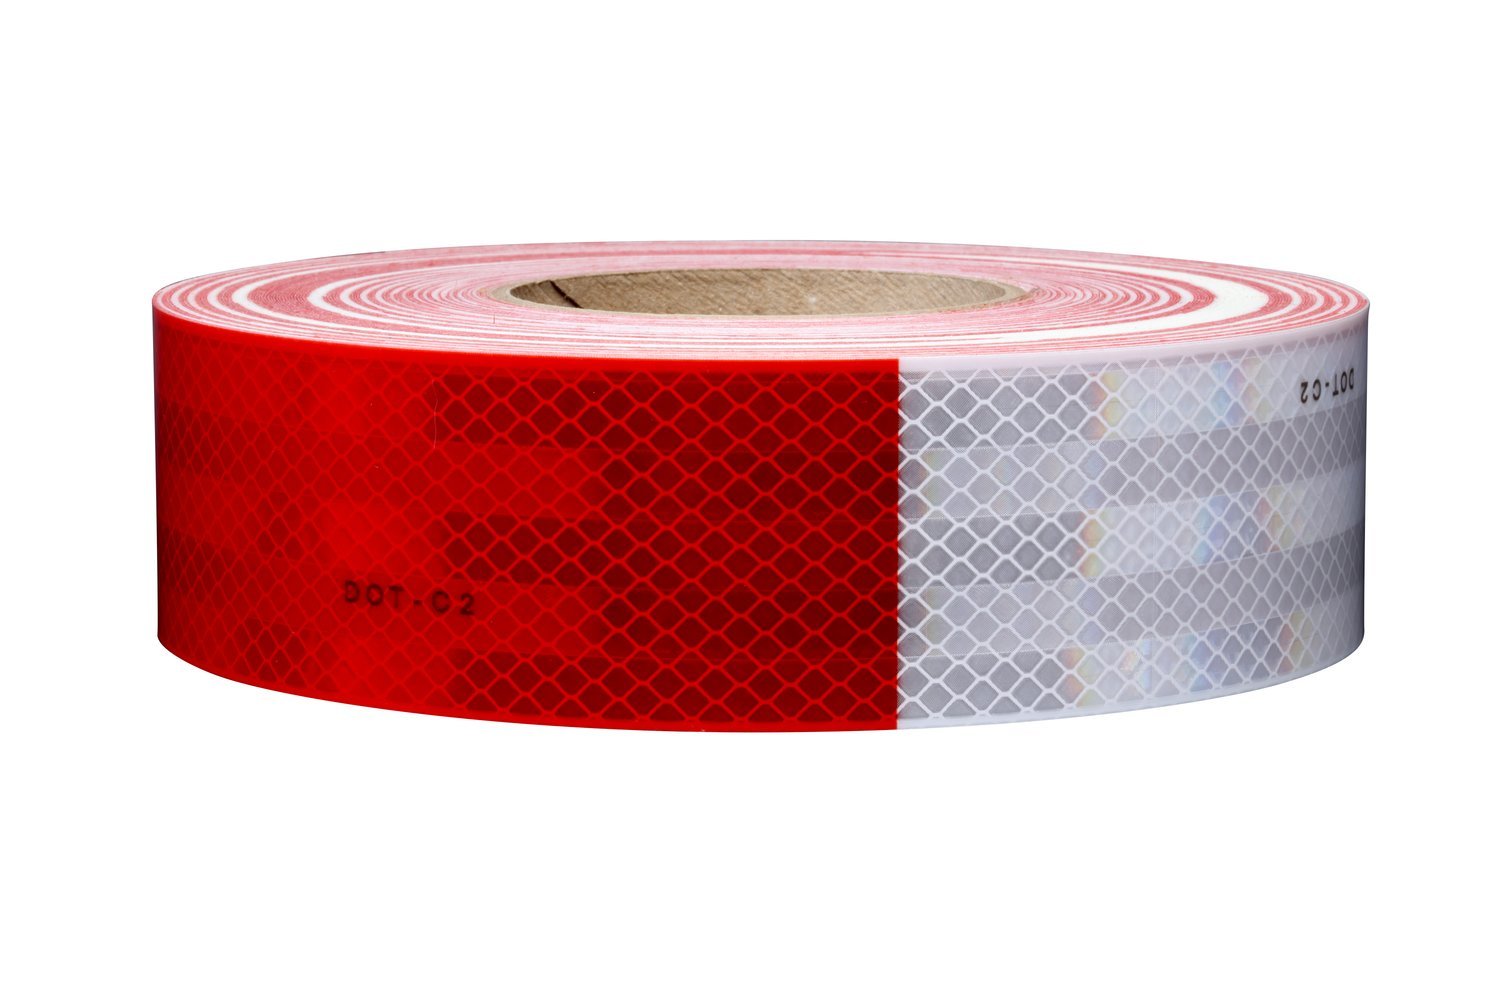 7010345189 - 3M Diamond Grade Conspicuity Markings 983-32 Red/White, 2 in x 50 yd,
kiss-cut every 36 in